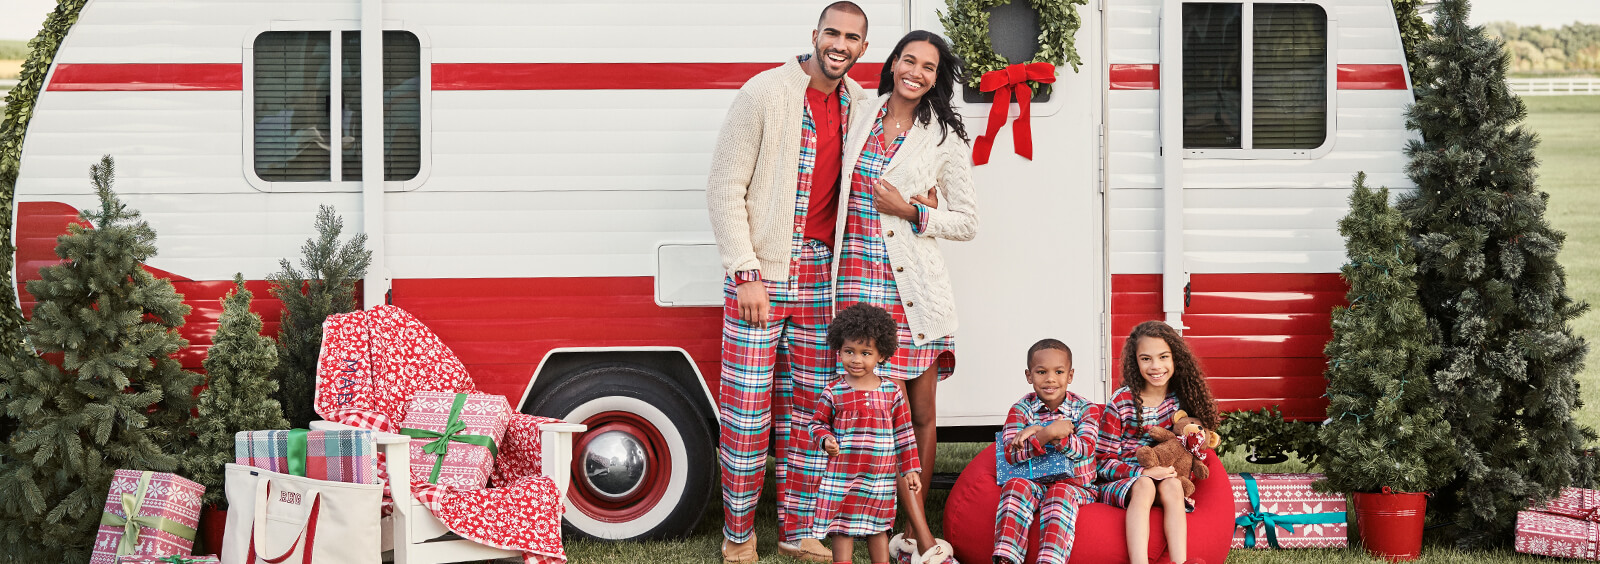 Holiday Party Idea: Matching Family Christmas Pajamas | Lands' End